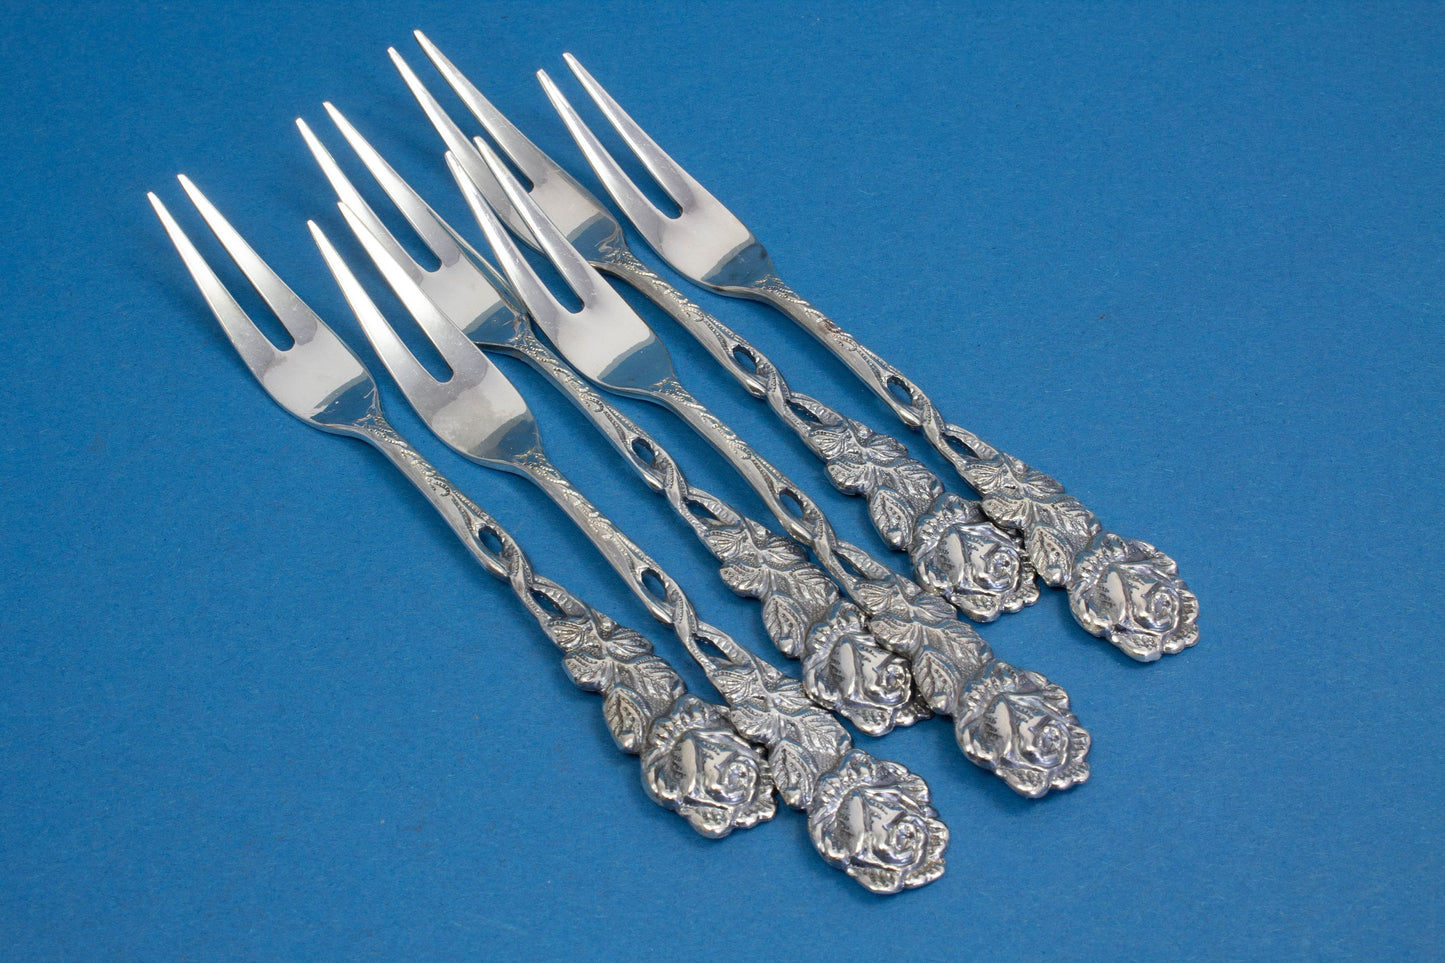 6 cocktail forks, small skewers